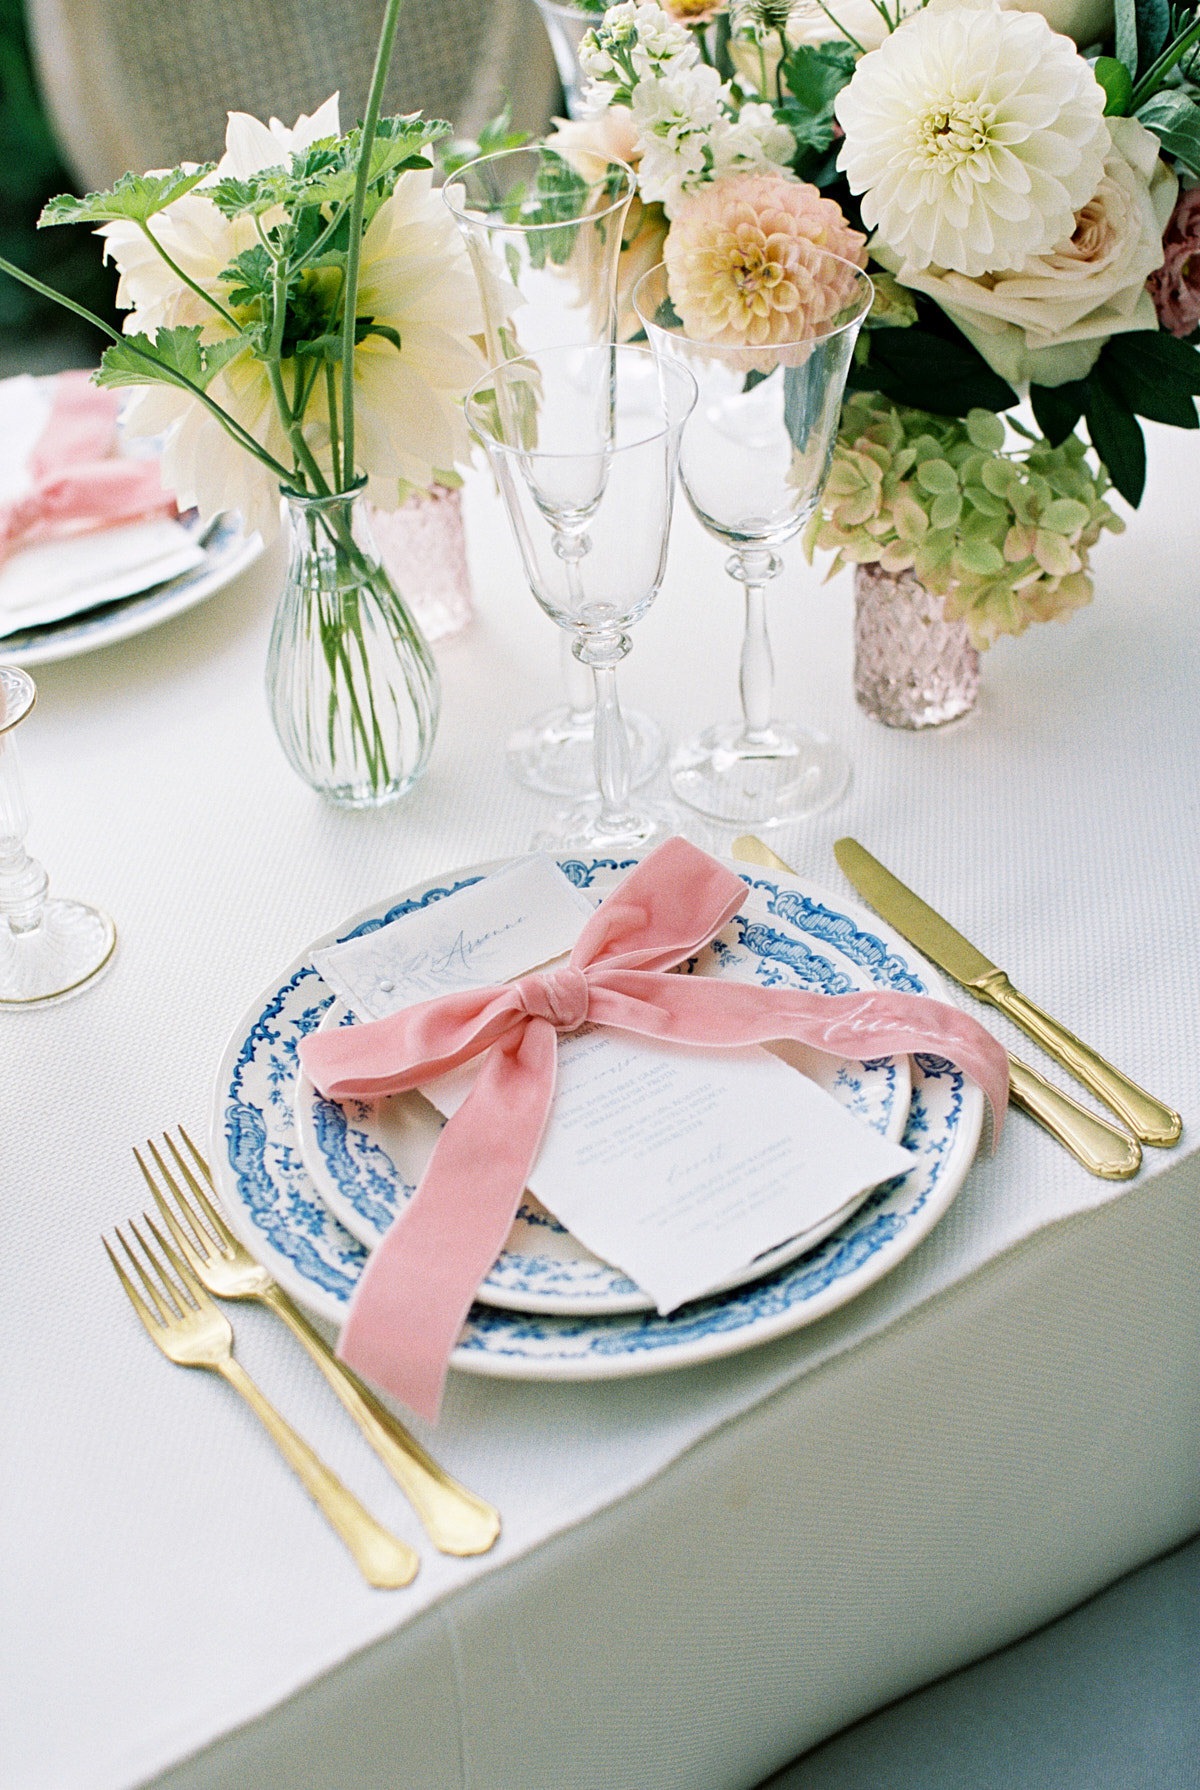 monogrammed napkin bow on the plate